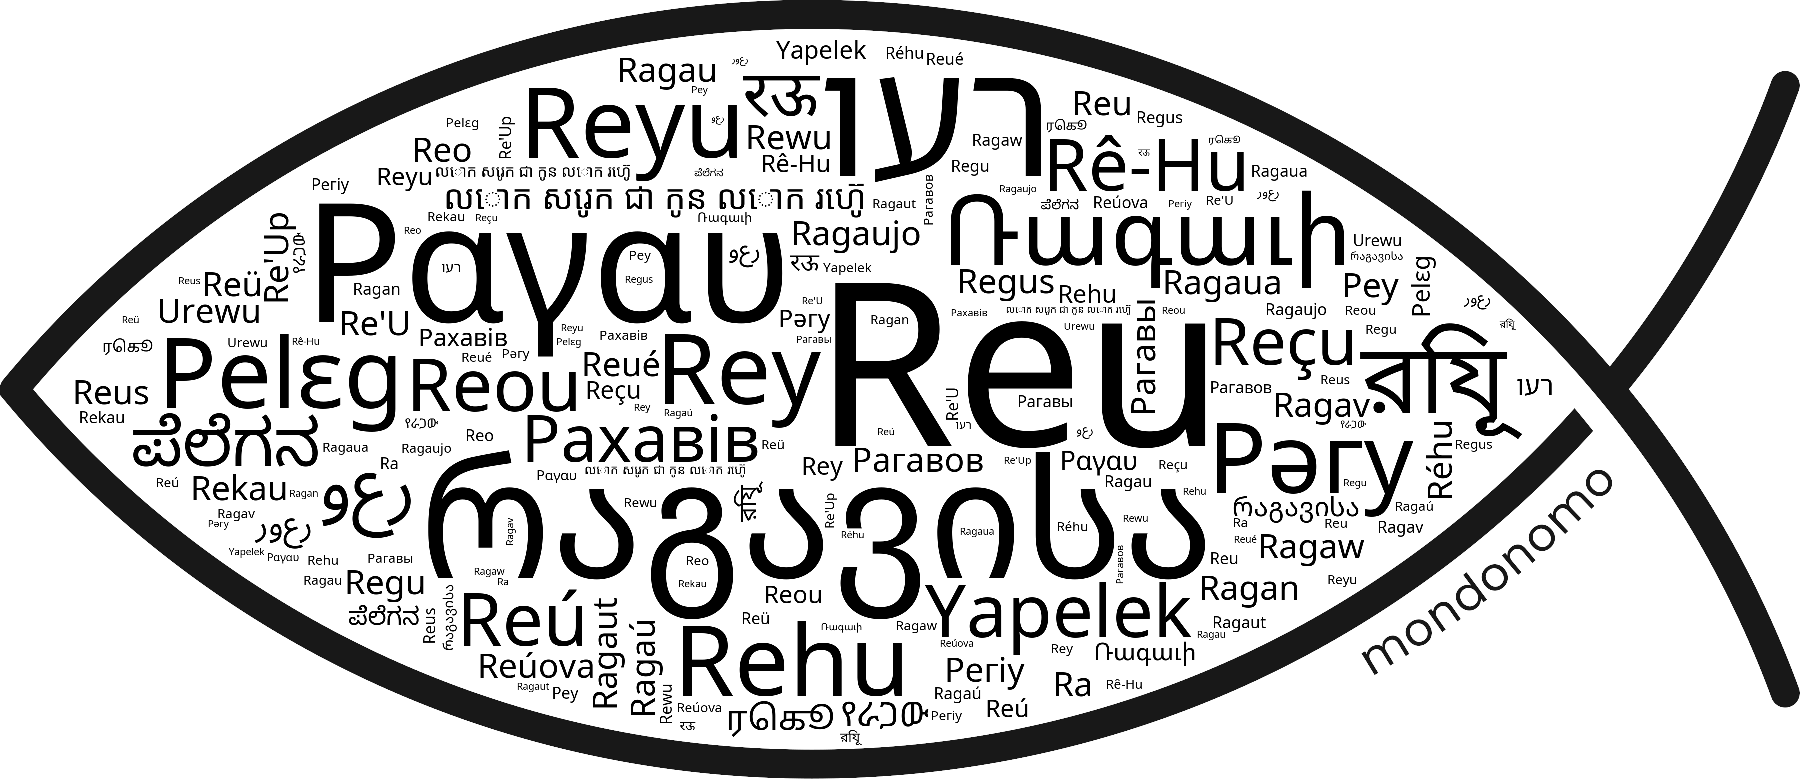 Name Reu in the world's Bibles